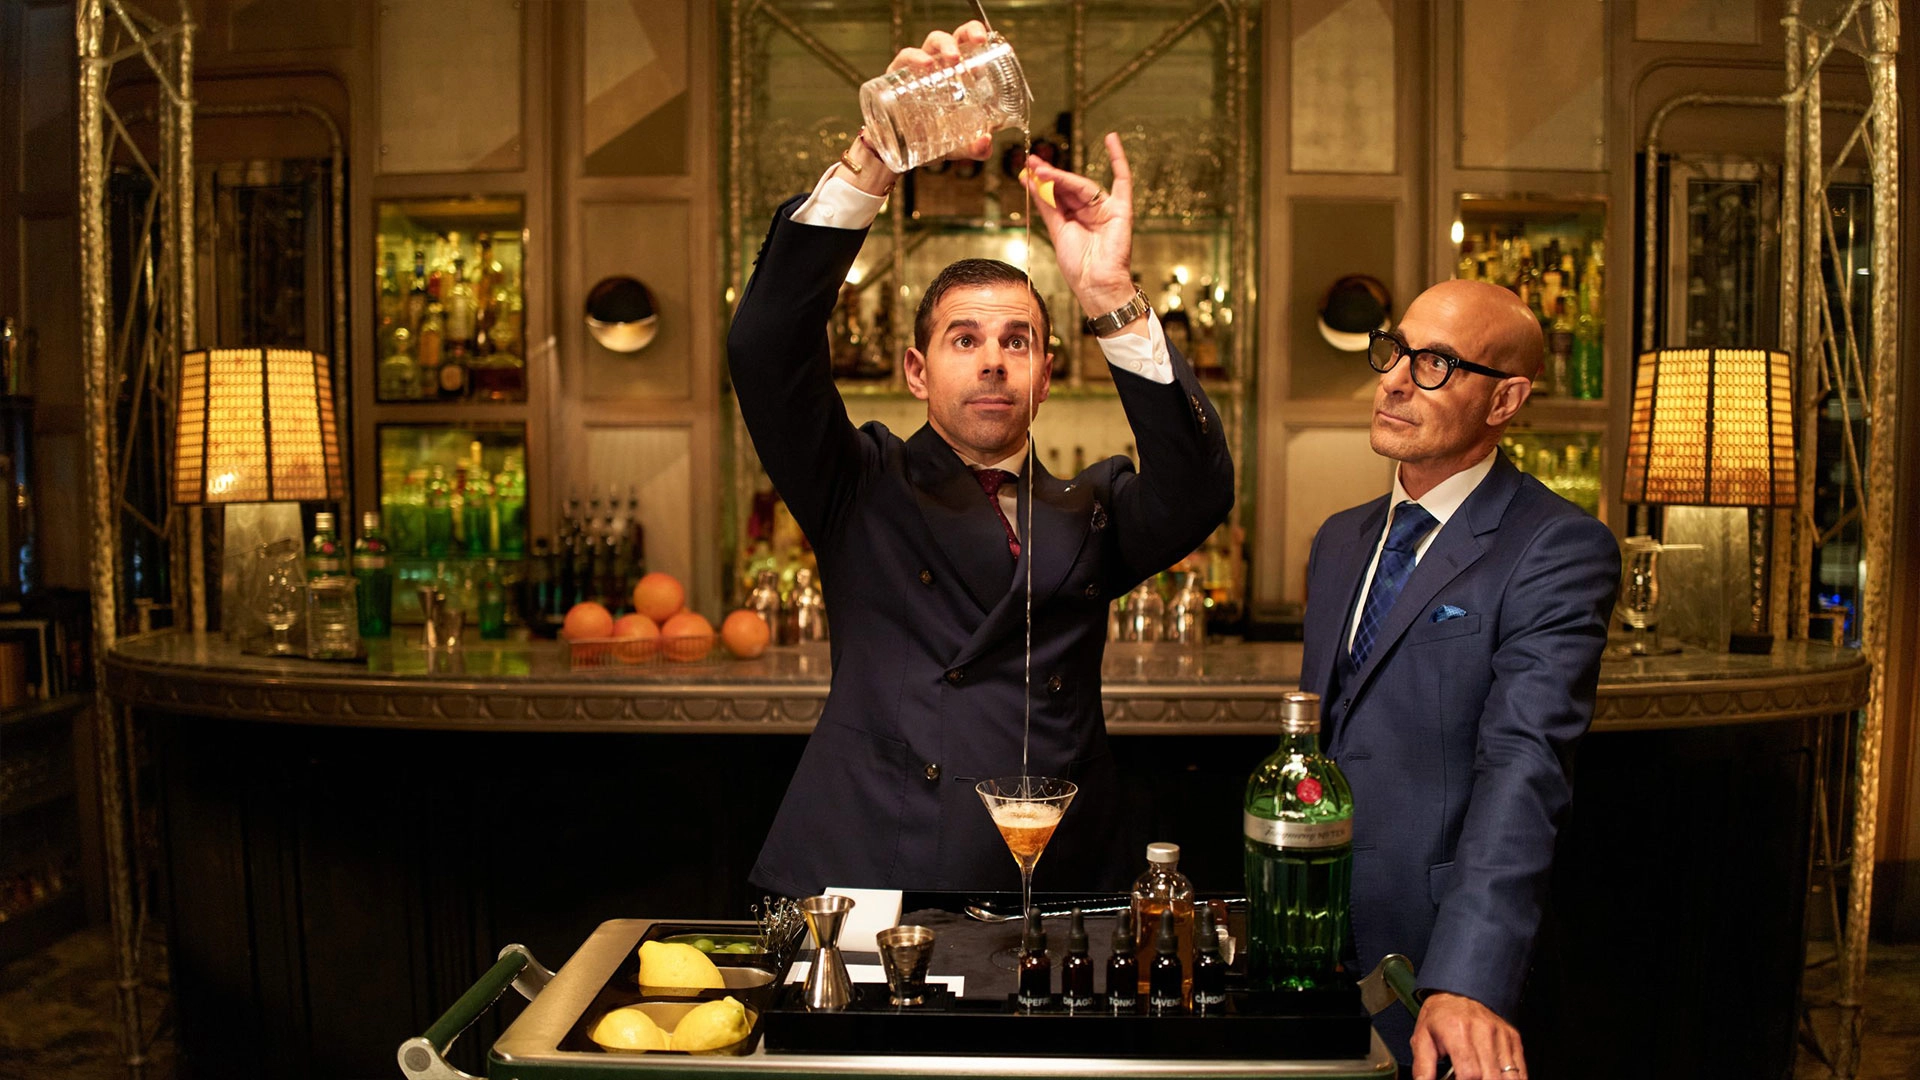 Best Cocktail Bar In The World’s Most Iconic Gin Cocktail & How to Make It